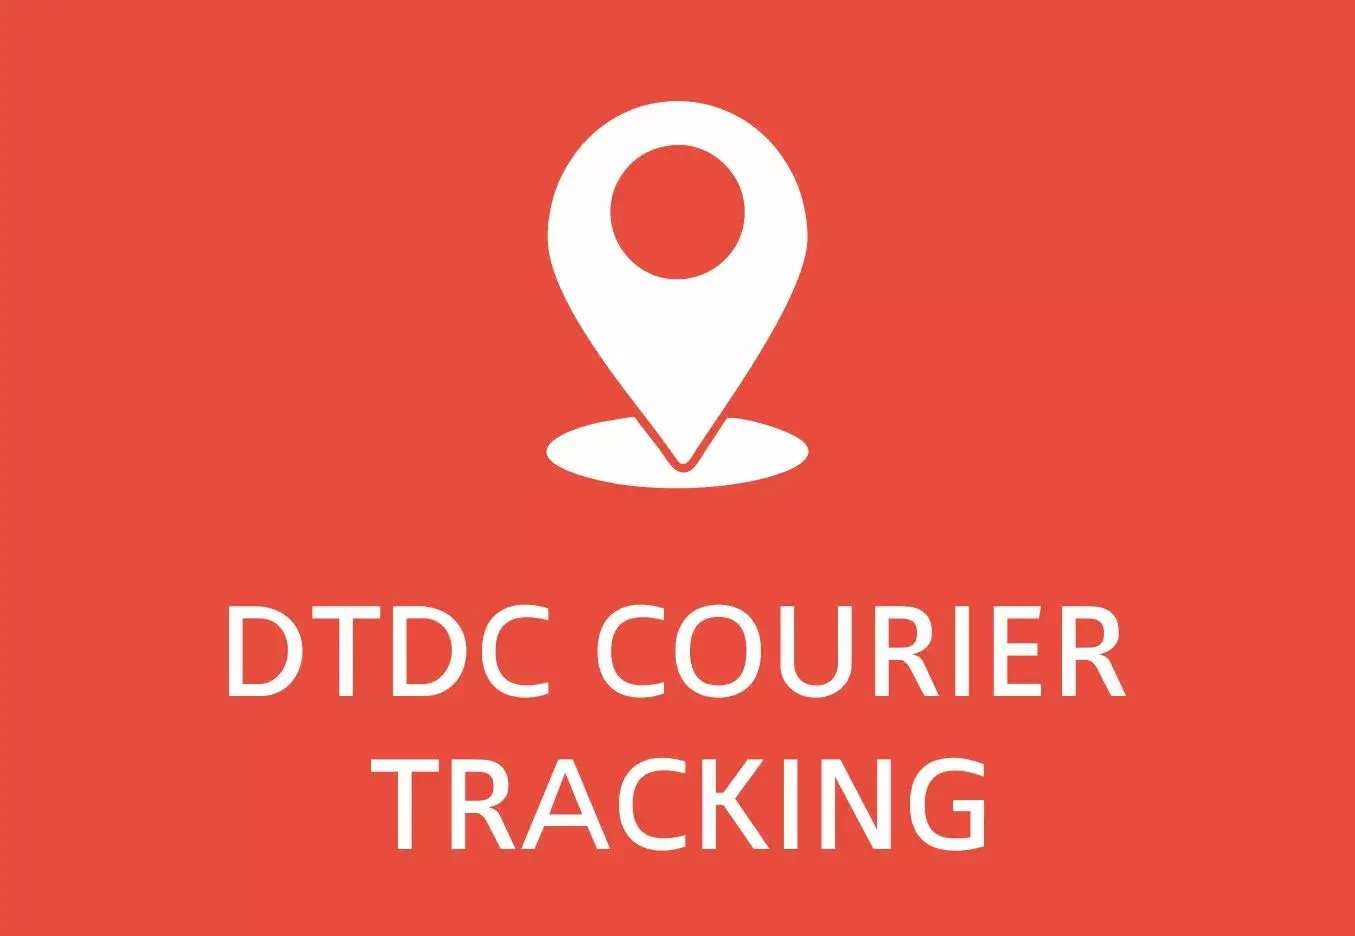 Dtdc courier tracking